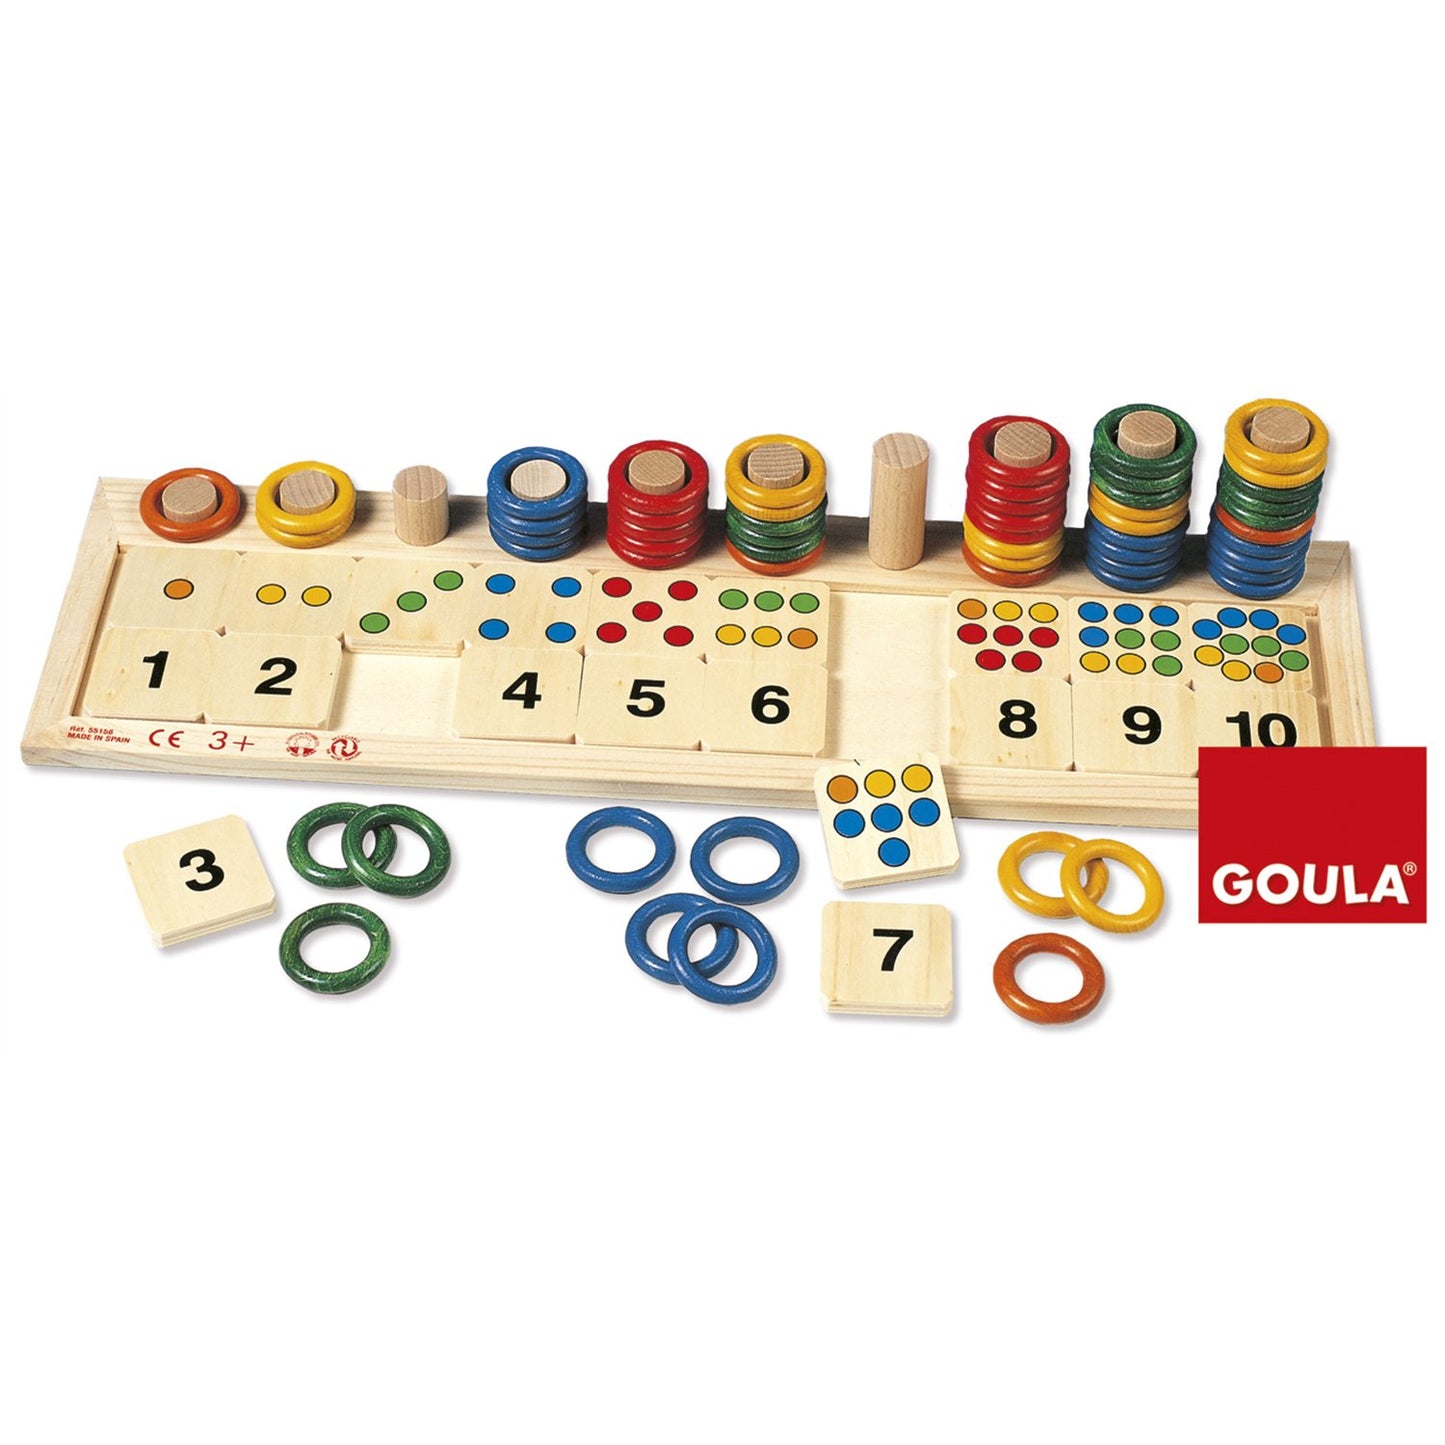 Goula Colored Rings Colores & Numbers Sorting & Pegging Game 顏色數字與數量排序套圈圈遊戲